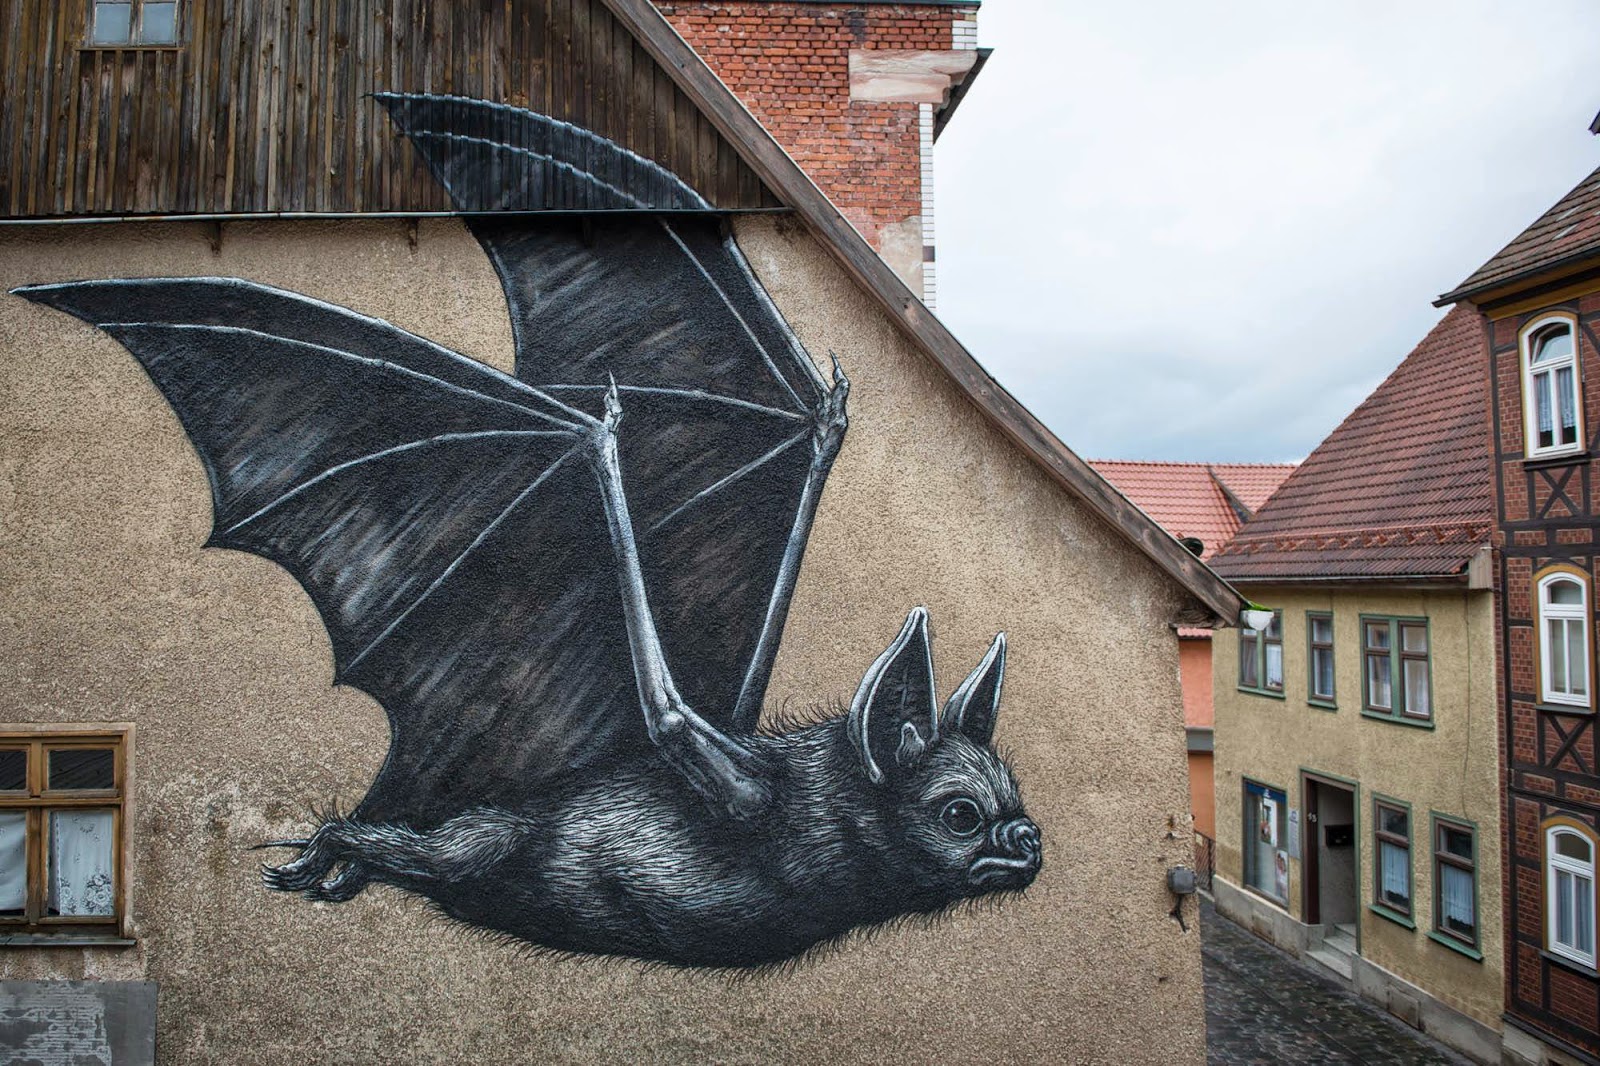 Our friend ROA is back in Europe where he was invited by the good lads from the WallCome project to paint on the streets of Schmalkalden in Germany.